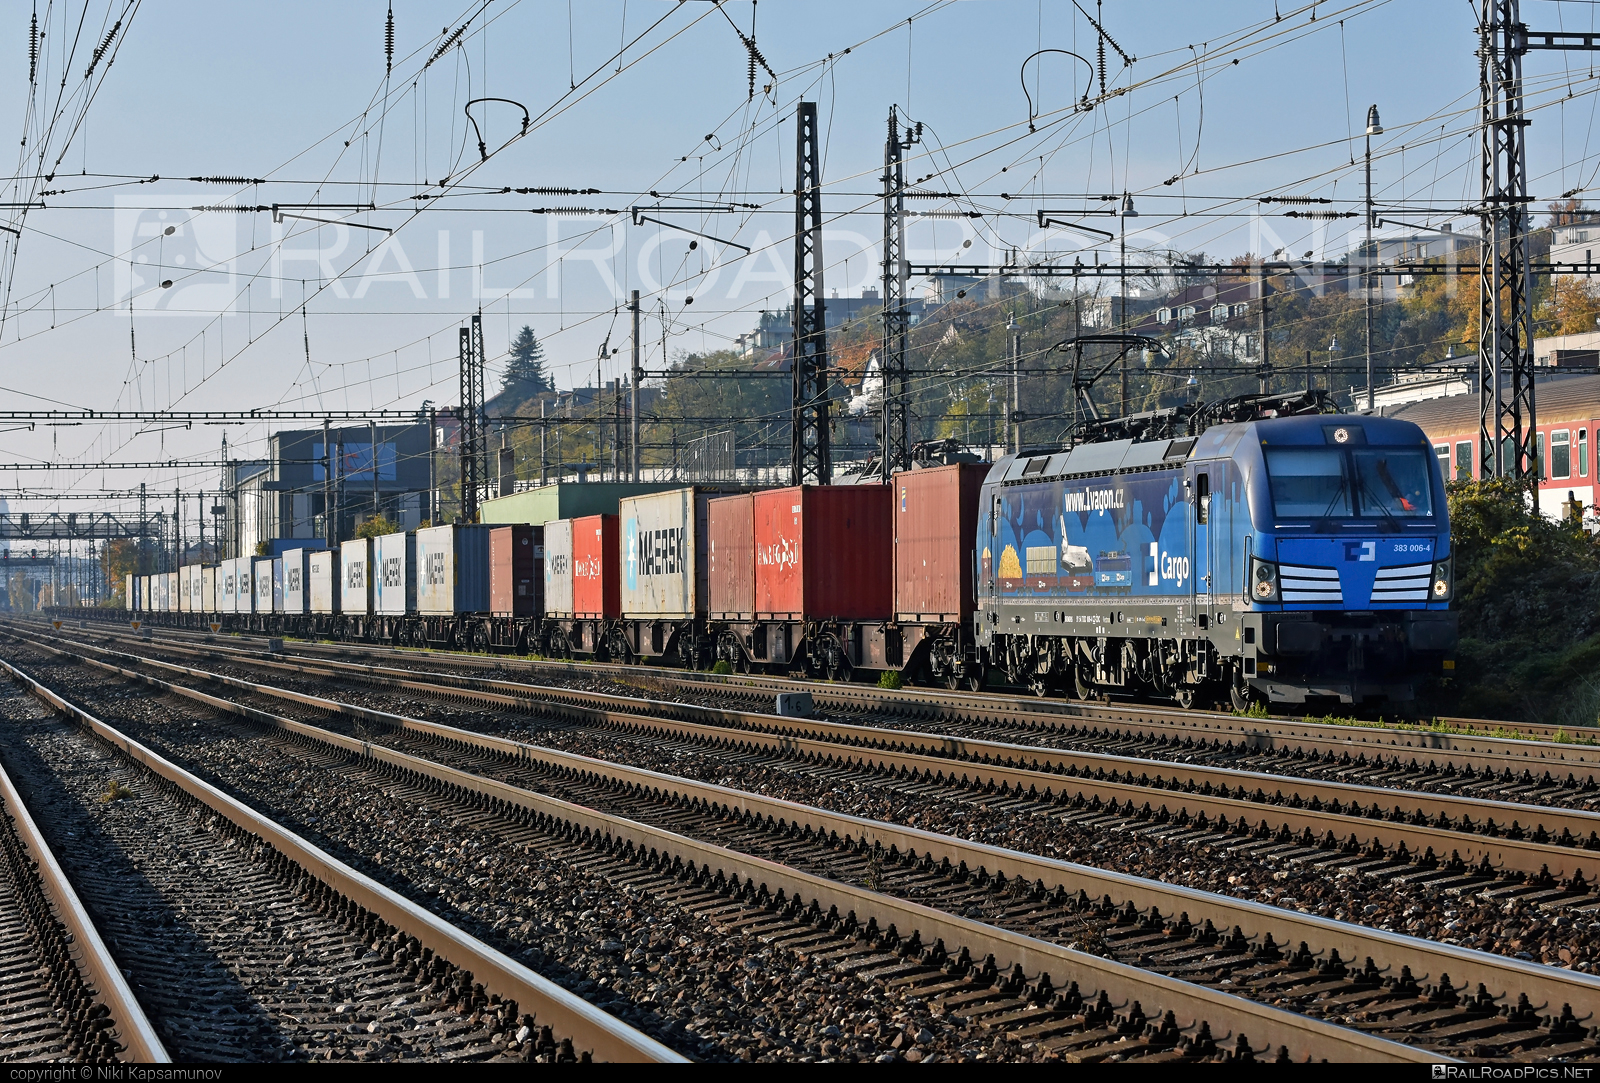 Siemens Vectron MS - 383 006-4 operated by ČD Cargo, a.s. #cdcargo #container #flatwagon #maersk #maersksealand #siemens #siemensVectron #siemensVectronMS #vectron #vectronMS